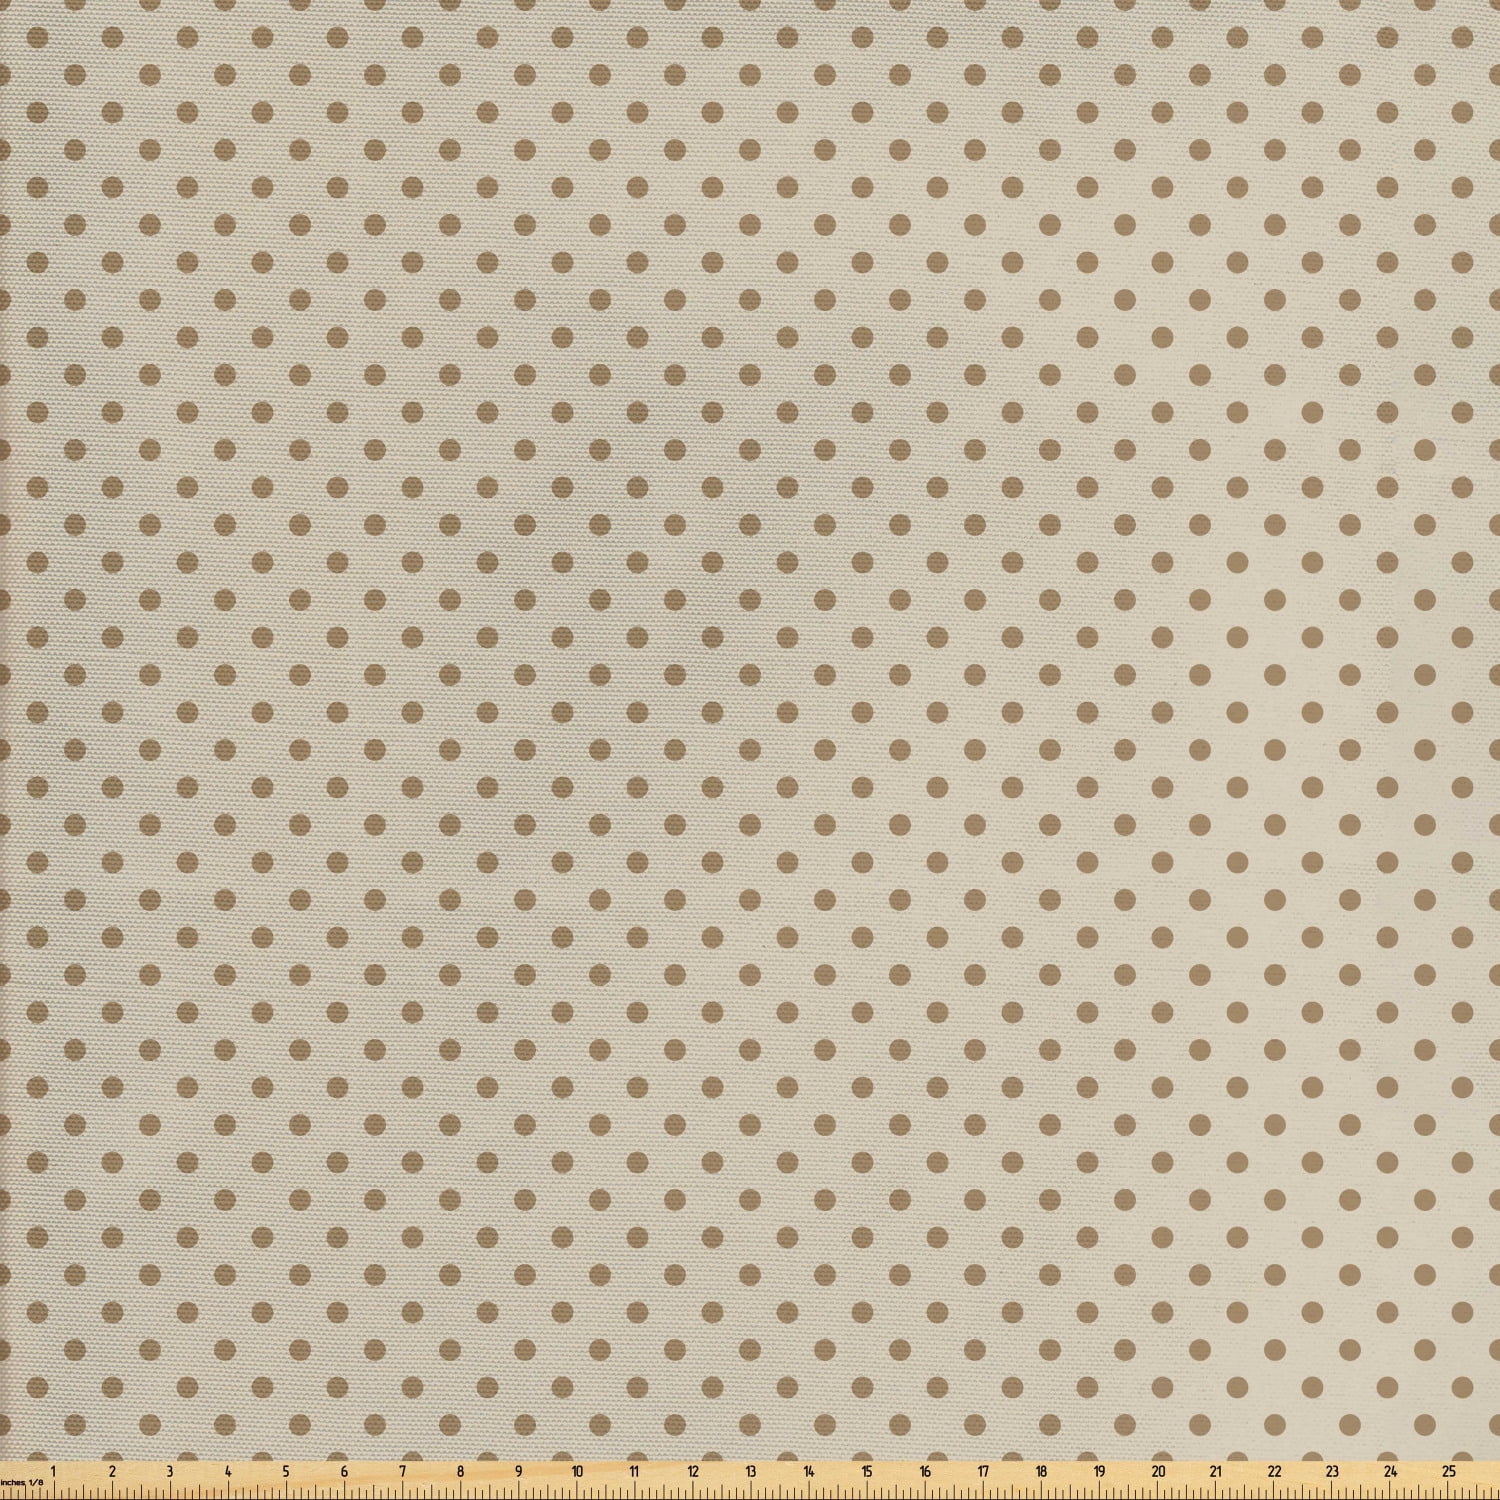 Beige Fabric by The Yard, Traditional Polka Dots Classical Motifs ...